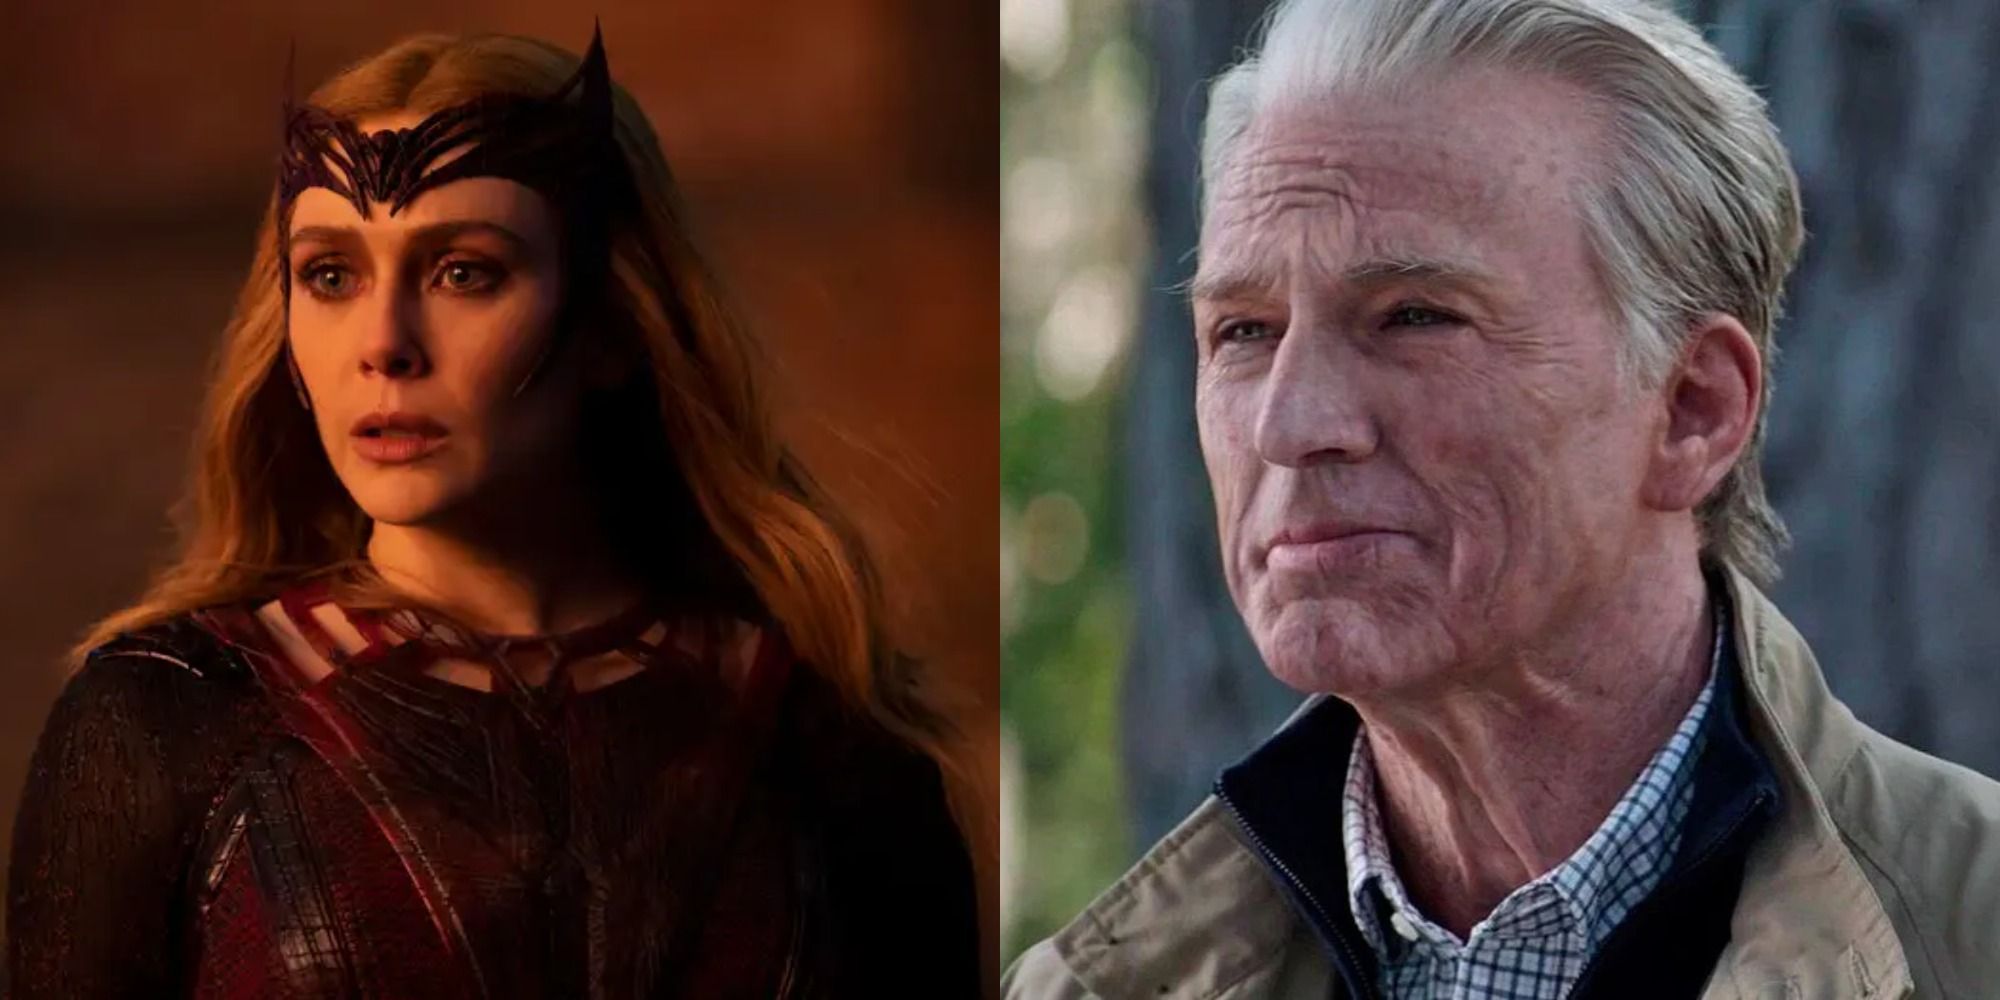 Split image showing Scarlet Witch in MoM and old Steve in Endgame.